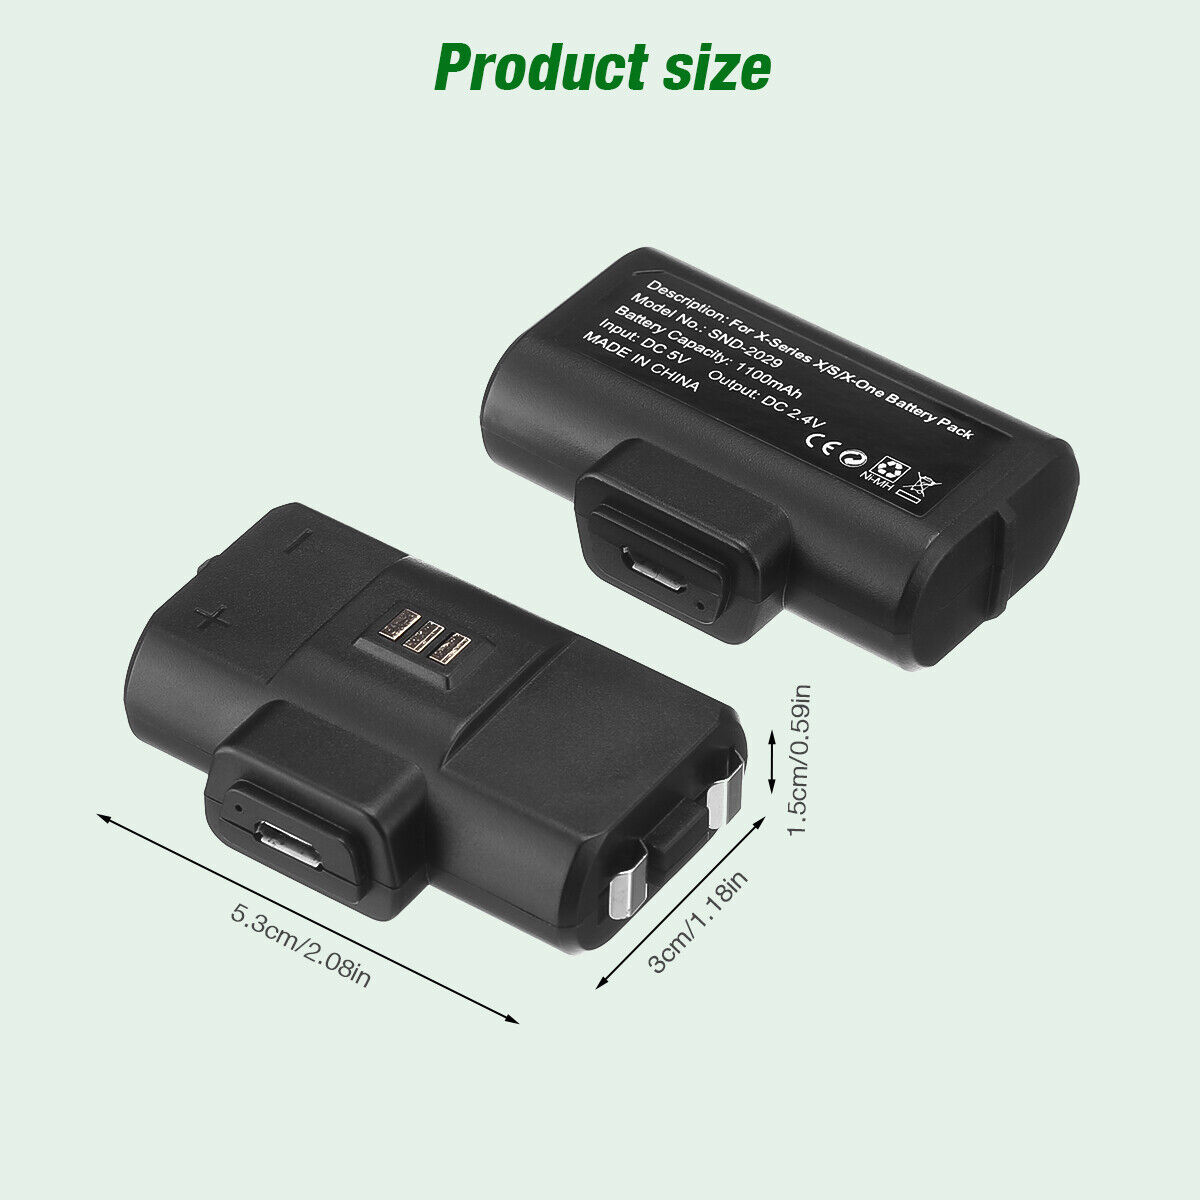 Rechargeable Battery Pack For XBox One X/S Series X/S Controller & Charger Cable EBL Does not apply - фотография #6